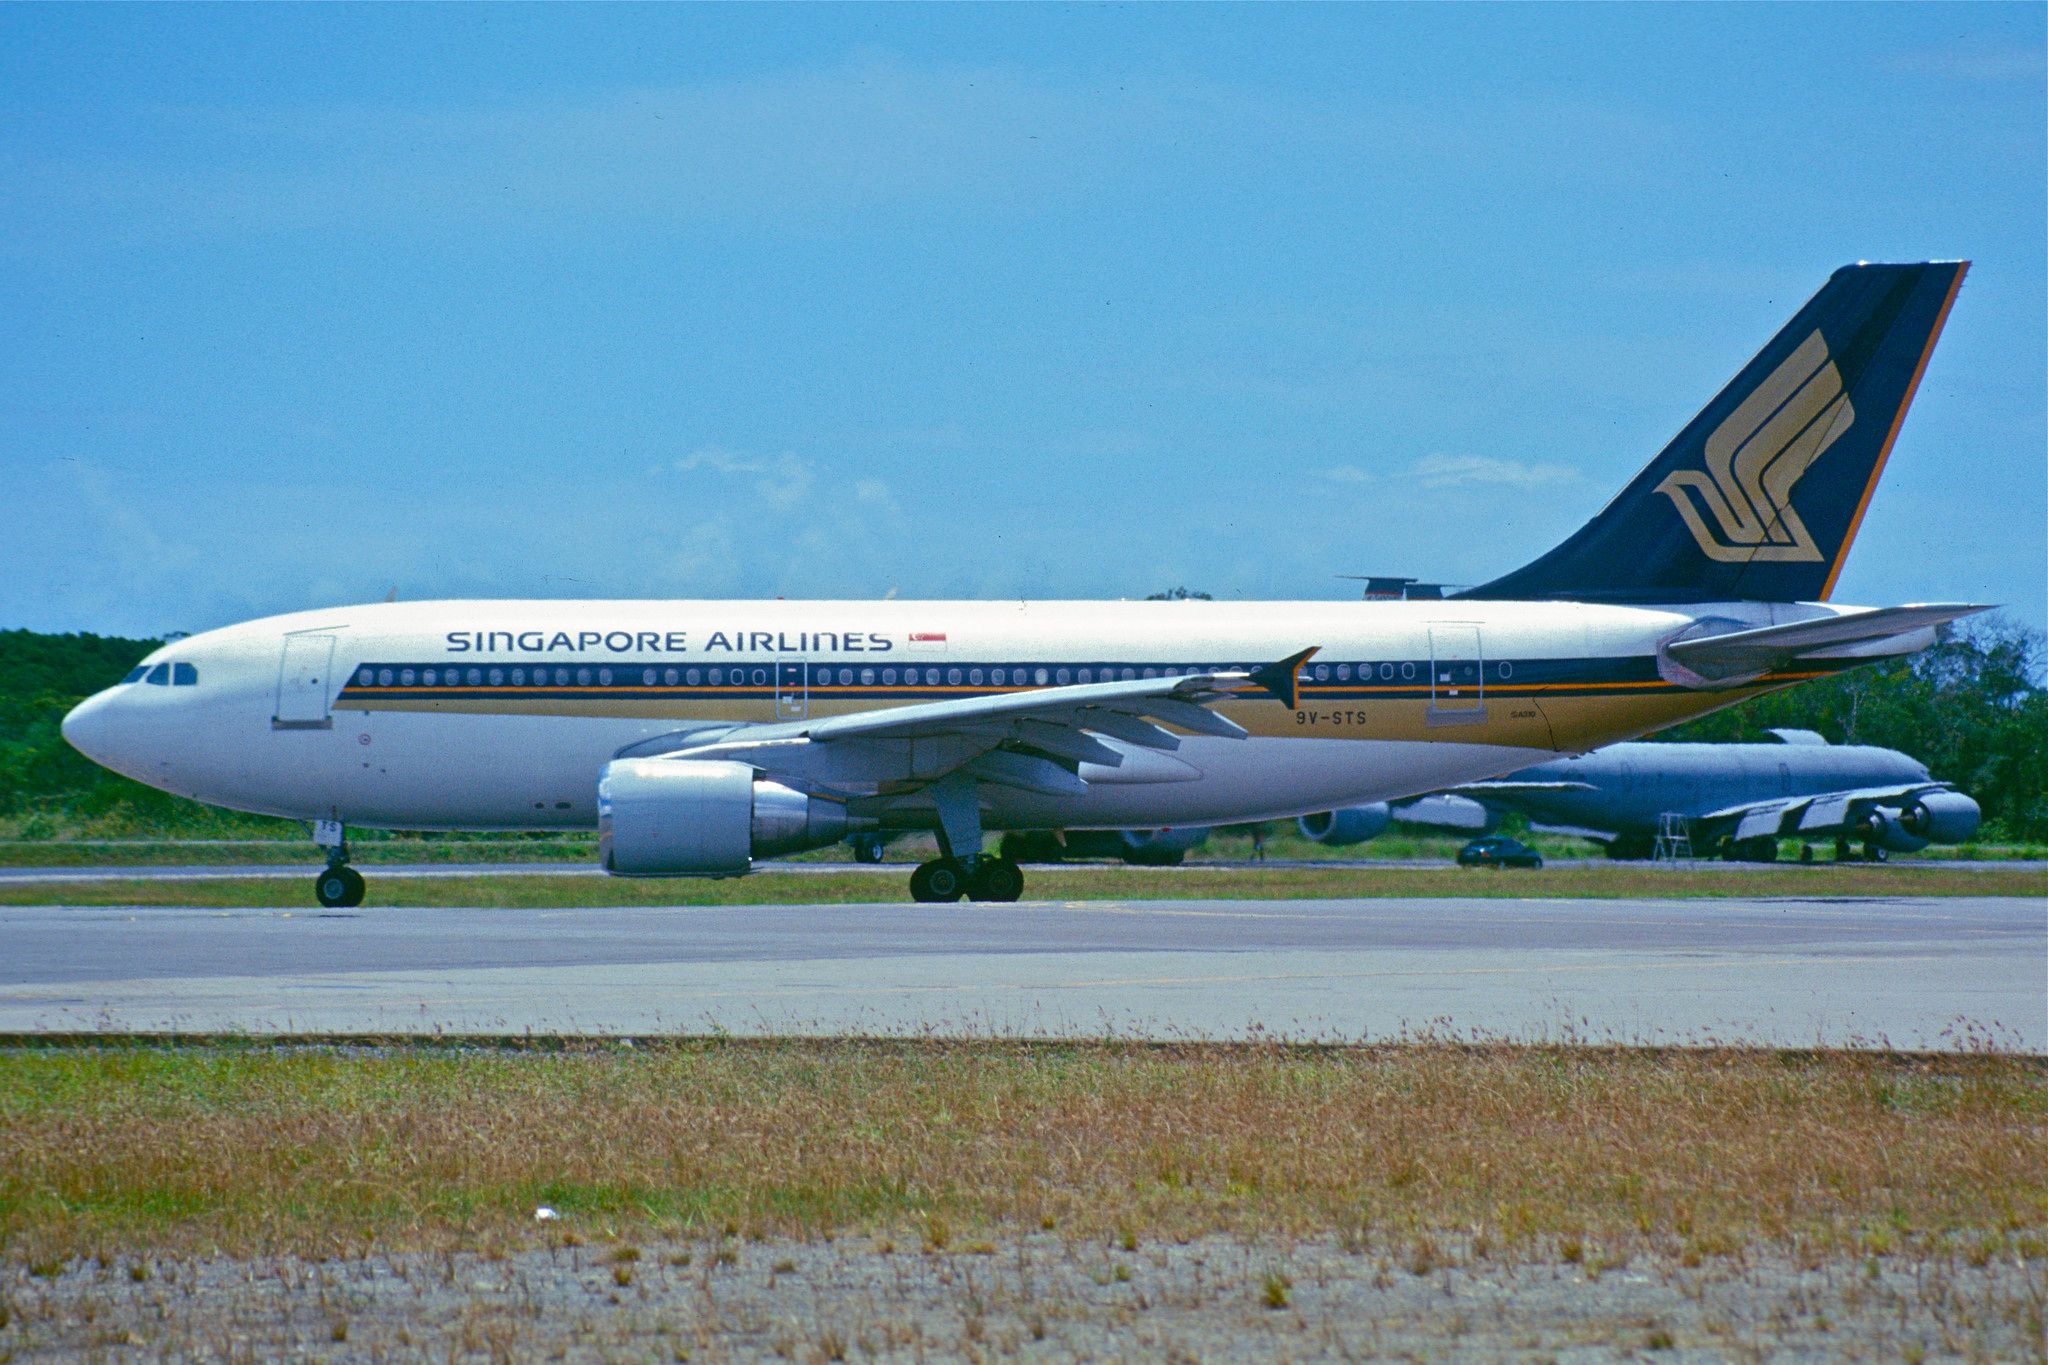 Singapore Airlines Airbus A310-300